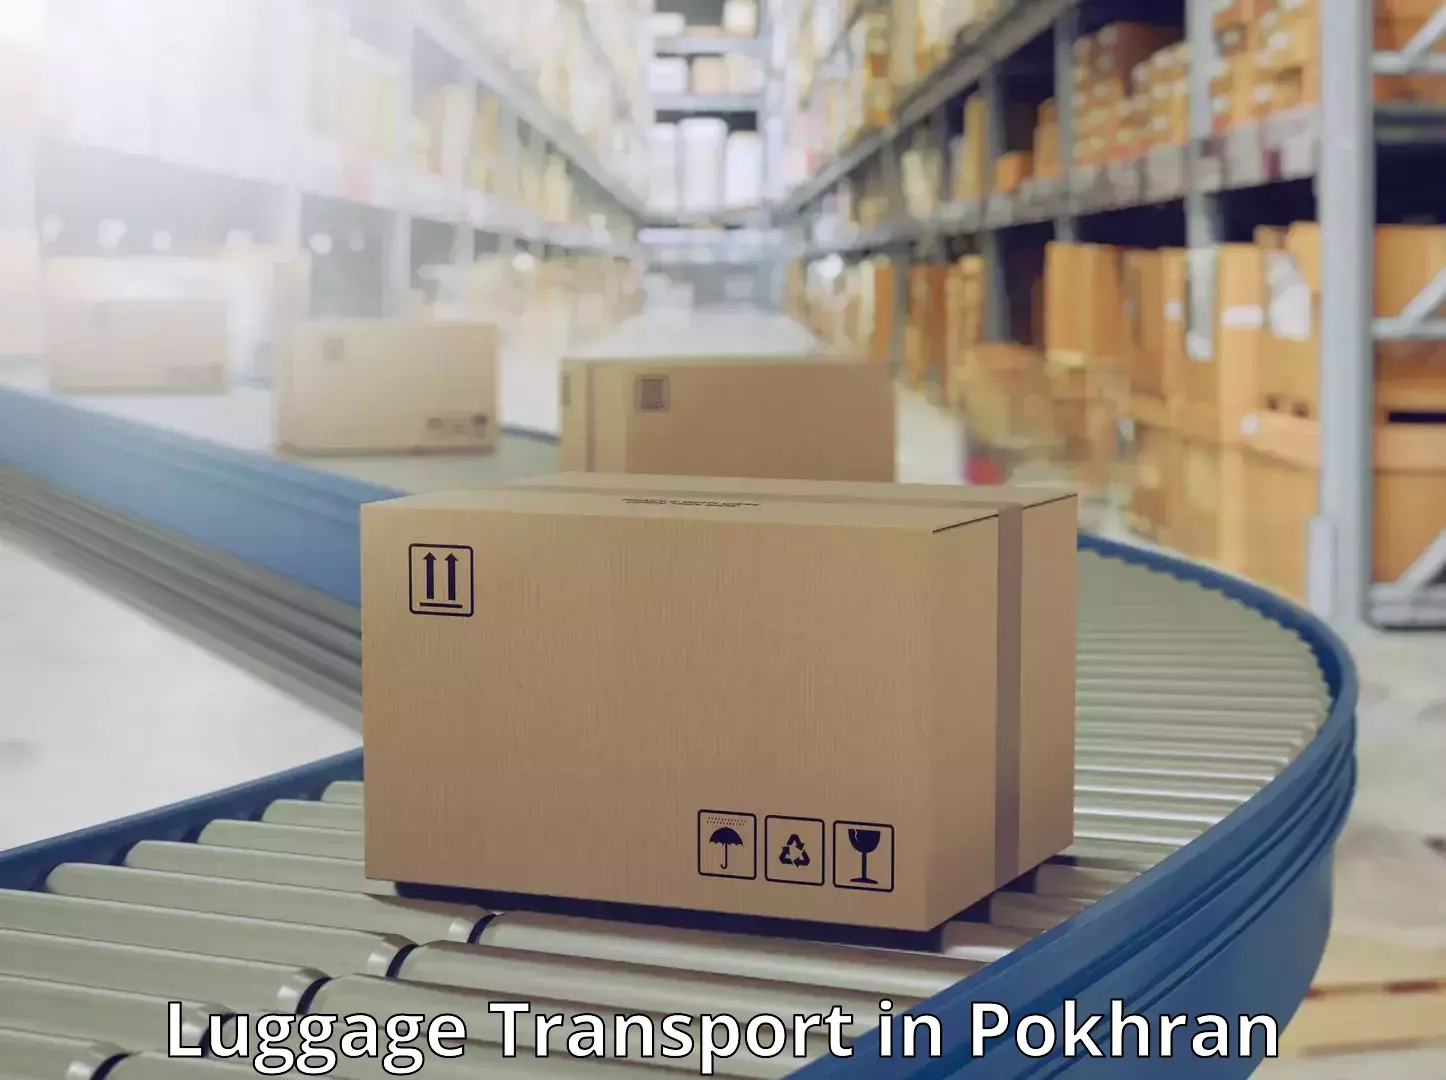 Luggage delivery operations in Pokhran